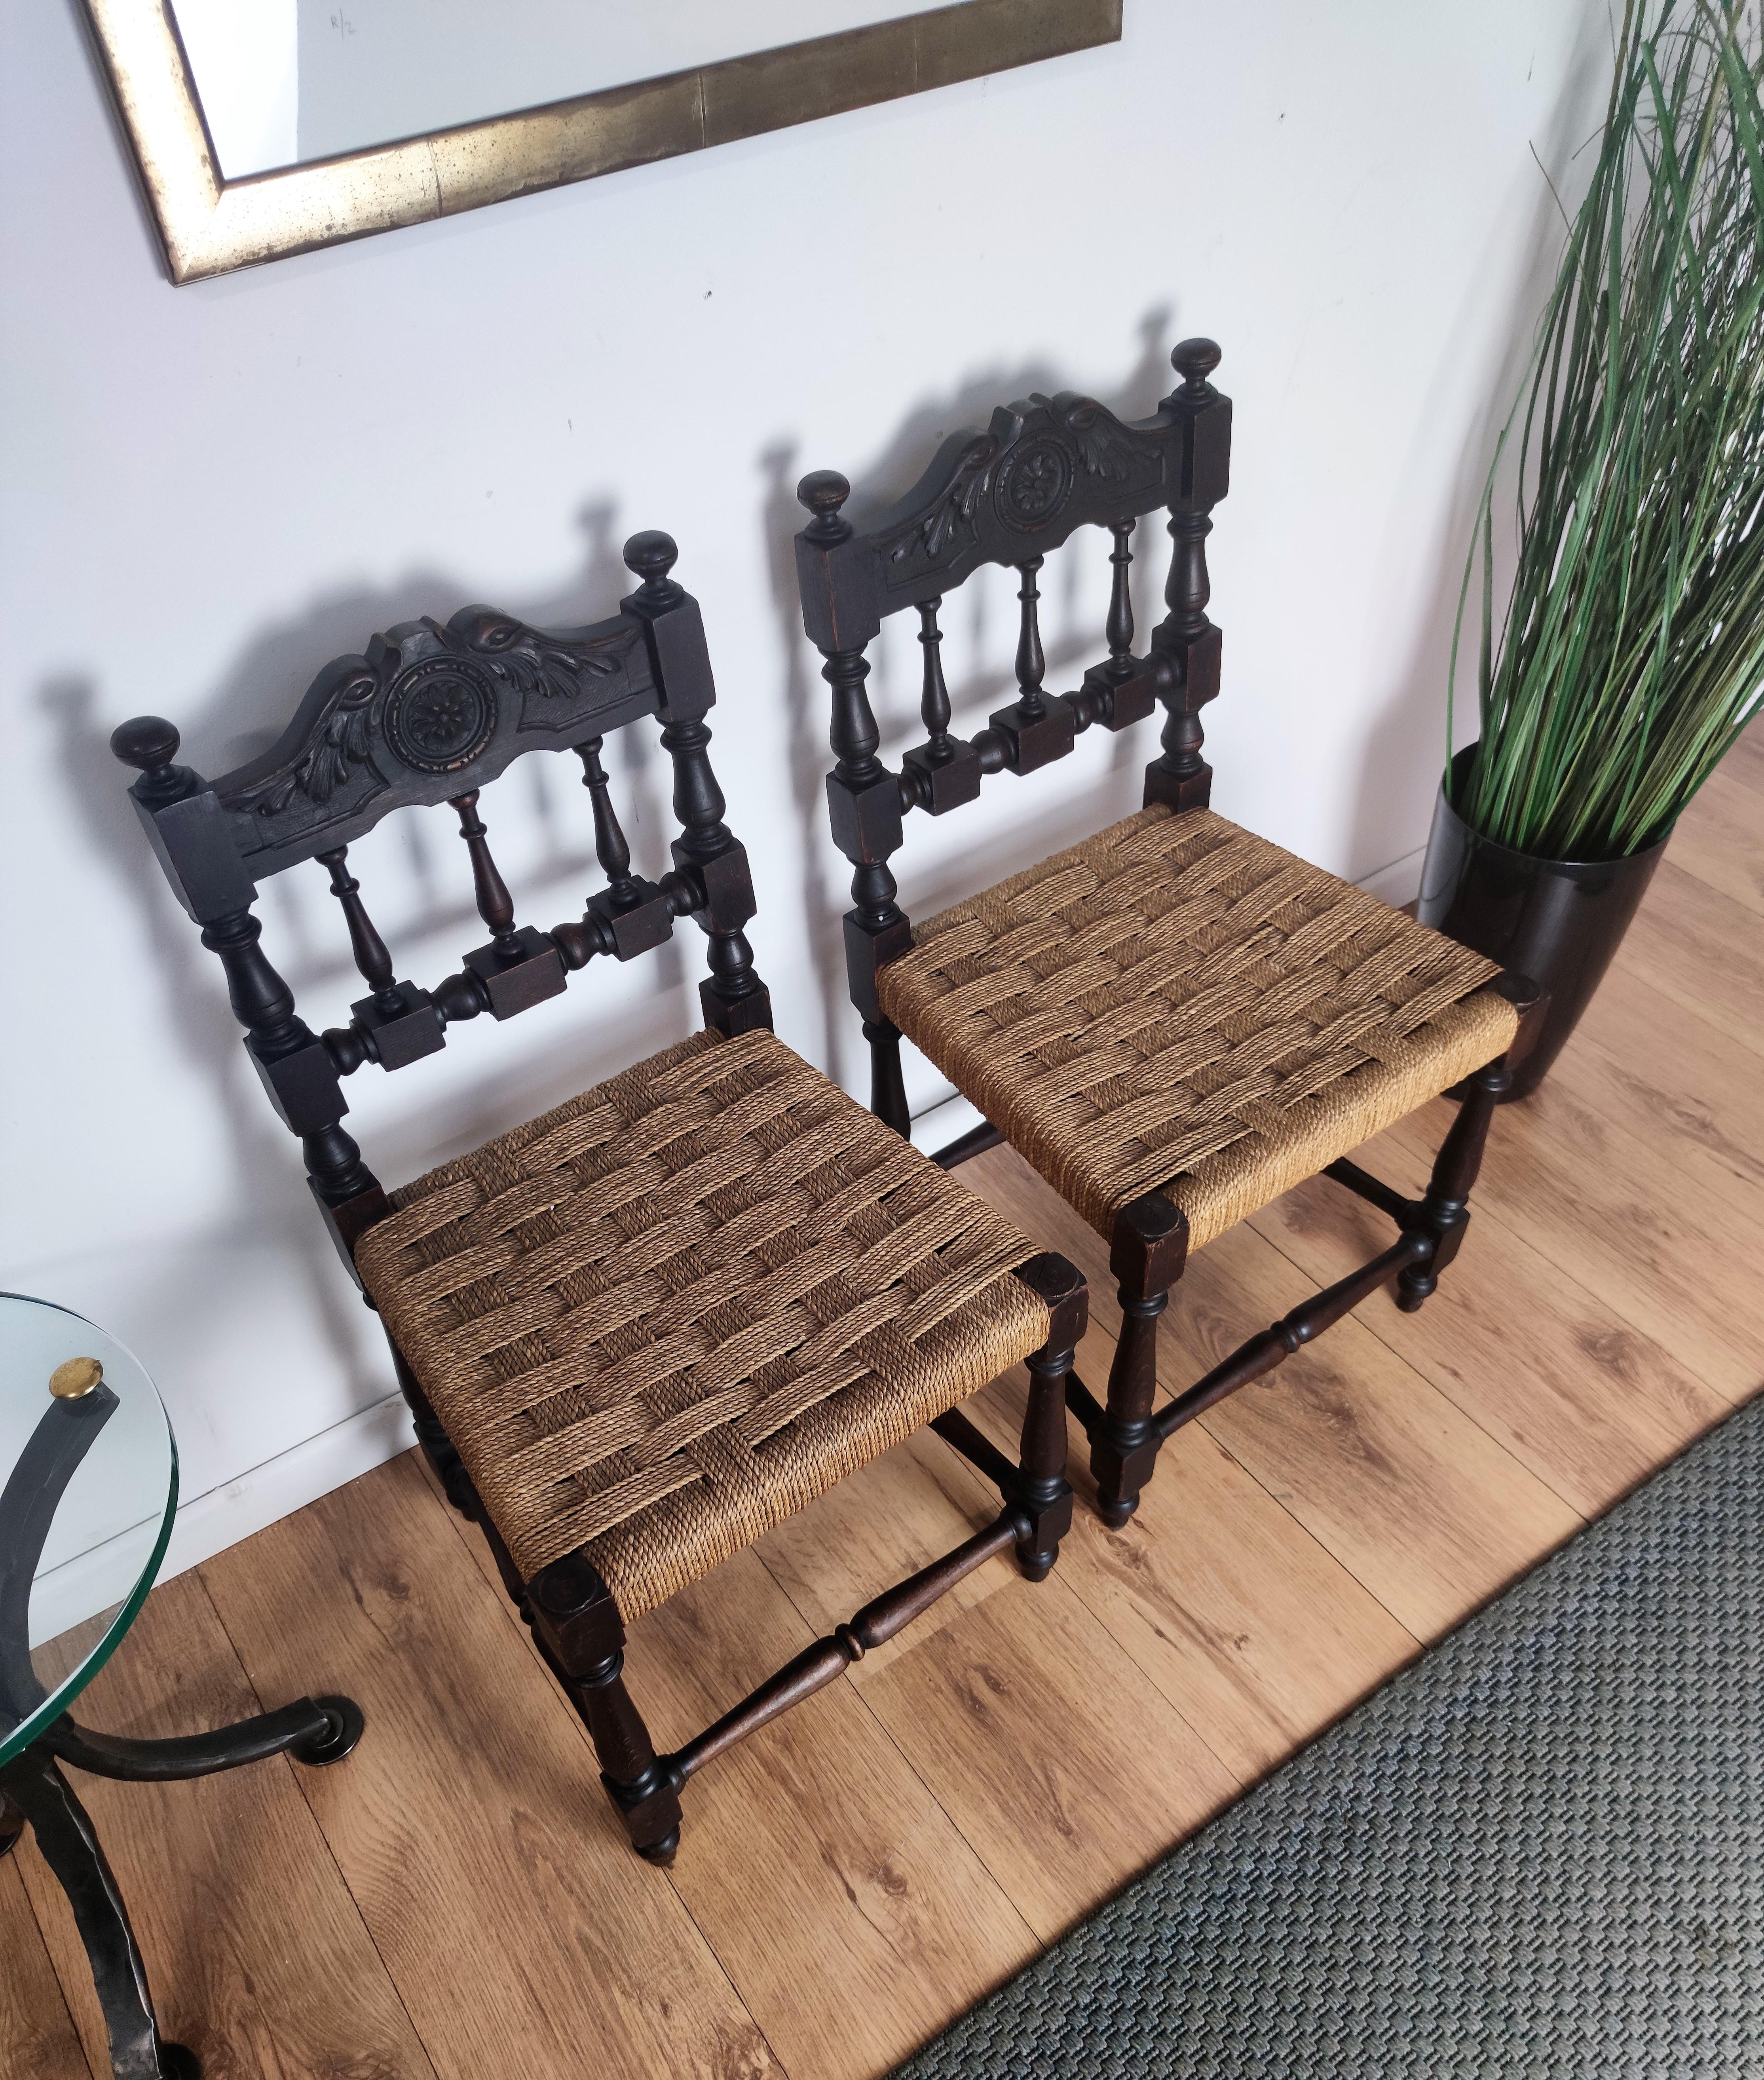 Pair of 1960s Italian Midcentury Carved Wood and Cord Woven Rope Chairs Stools For Sale 1